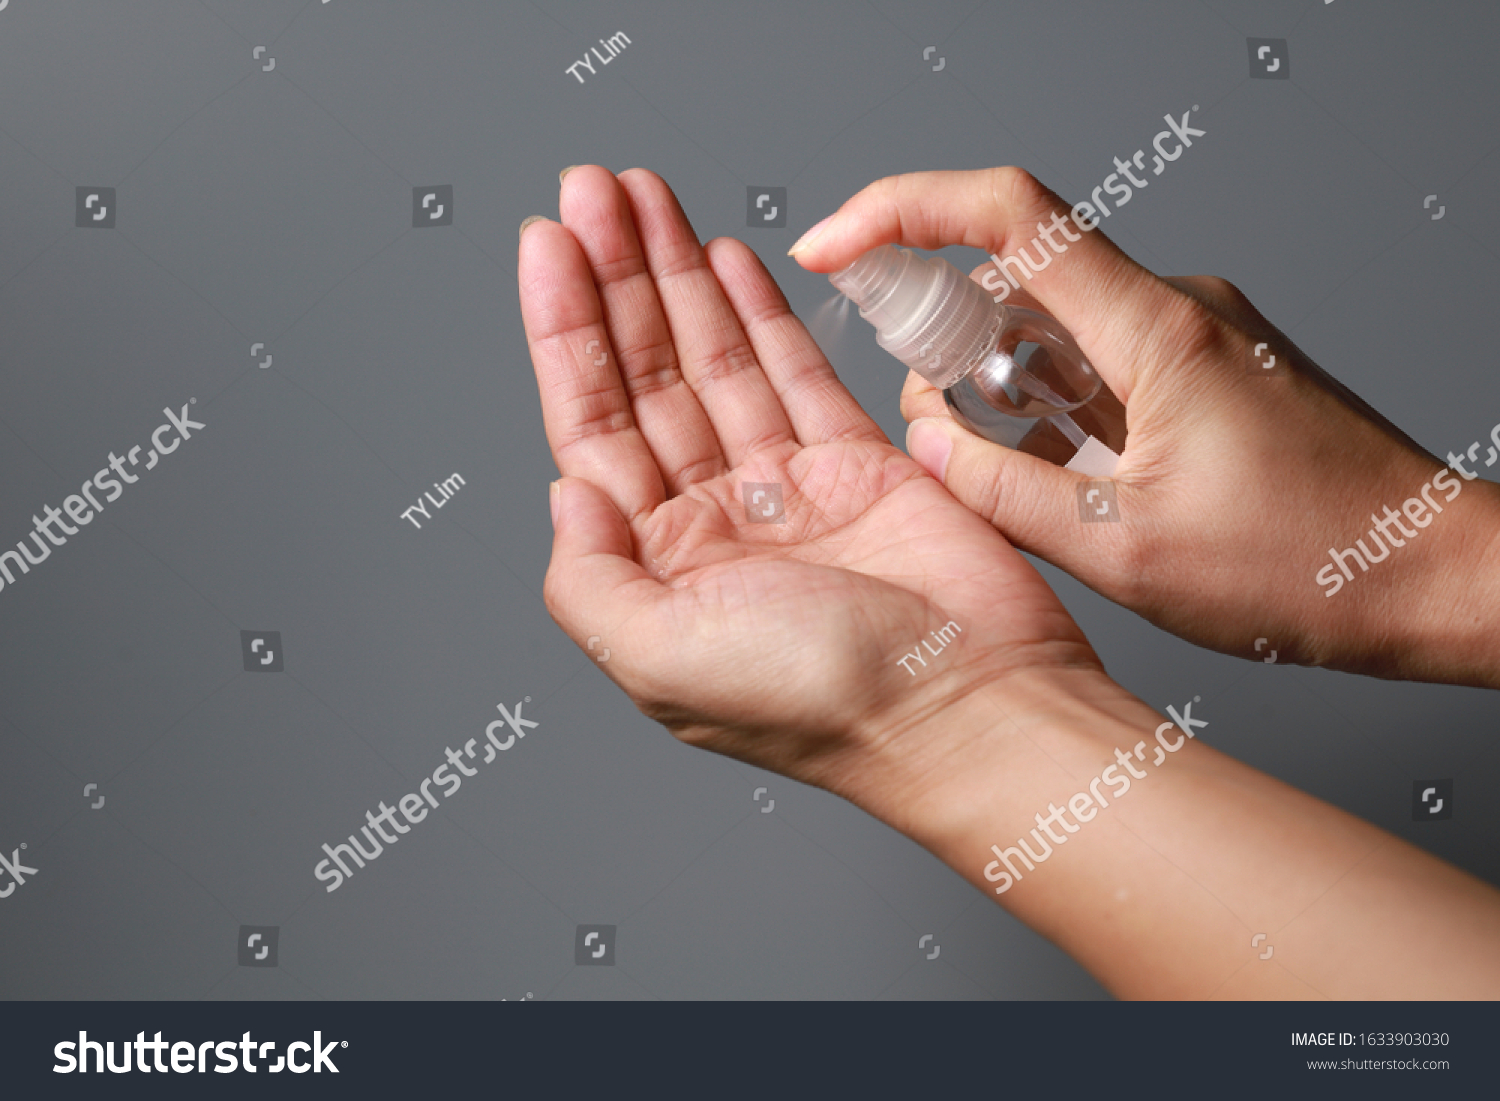 Hand of lady that applying alcohol spray or anti-bacteria spray to prevent the spread of germs, bacteria and virus. Personal hygiene concept.  #1633903030